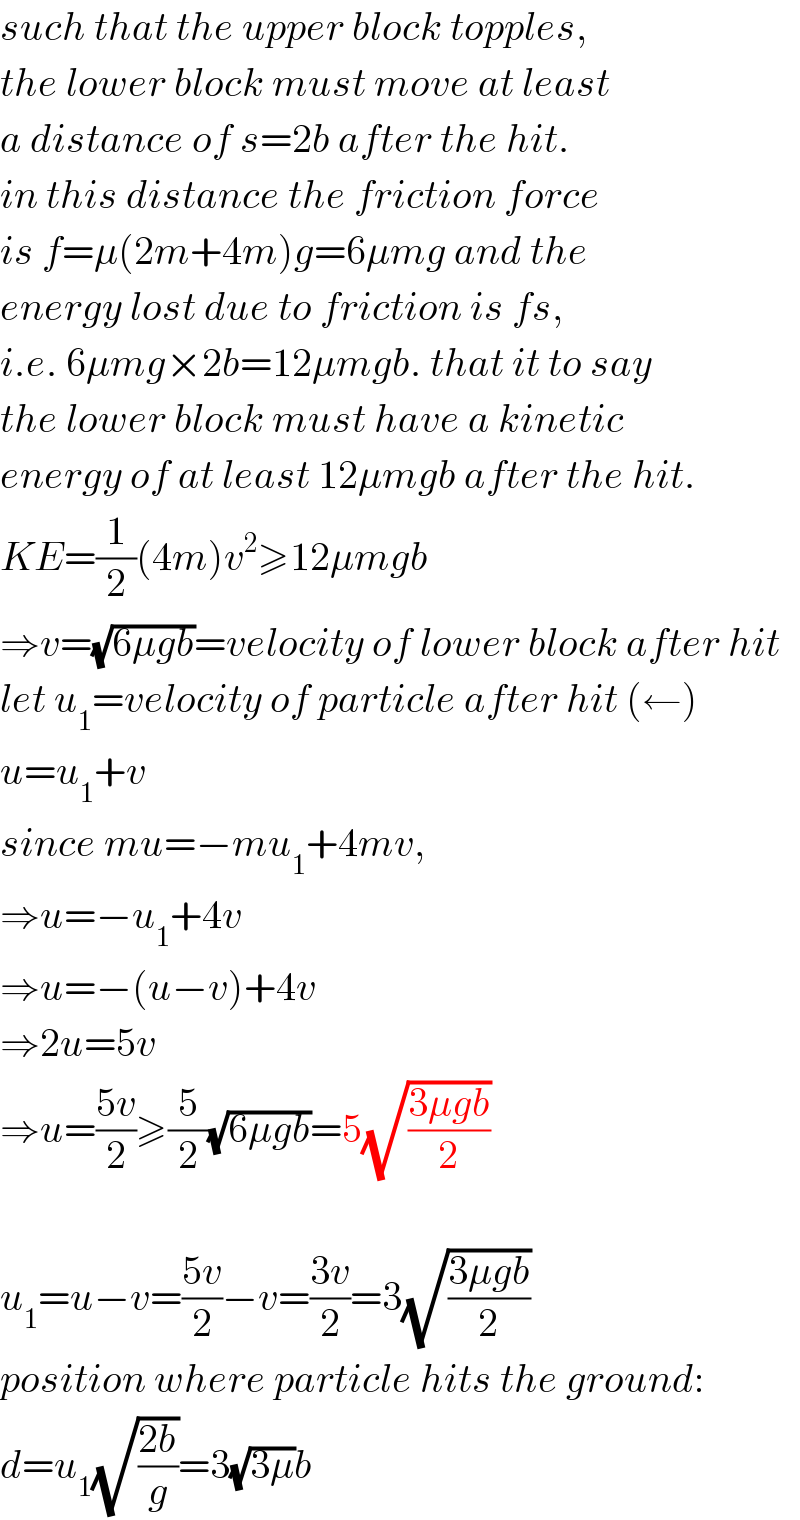 such that the upper block topples,  the lower block must move at least  a distance of s=2b after the hit.  in this distance the friction force  is f=μ(2m+4m)g=6μmg and the  energy lost due to friction is fs,  i.e. 6μmg×2b=12μmgb. that it to say  the lower block must have a kinetic  energy of at least 12μmgb after the hit.  KE=(1/2)(4m)v^2 ≥12μmgb  ⇒v=(√(6μgb))=velocity of lower block after hit  let u_1 =velocity of particle after hit (←)  u=u_1 +v  since mu=−mu_1 +4mv,  ⇒u=−u_1 +4v  ⇒u=−(u−v)+4v  ⇒2u=5v  ⇒u=((5v)/2)≥(5/2)(√(6μgb))=5(√((3μgb)/2))    u_1 =u−v=((5v)/2)−v=((3v)/2)=3(√((3μgb)/2))  position where particle hits the ground:  d=u_1 (√((2b)/g))=3(√(3μ))b  